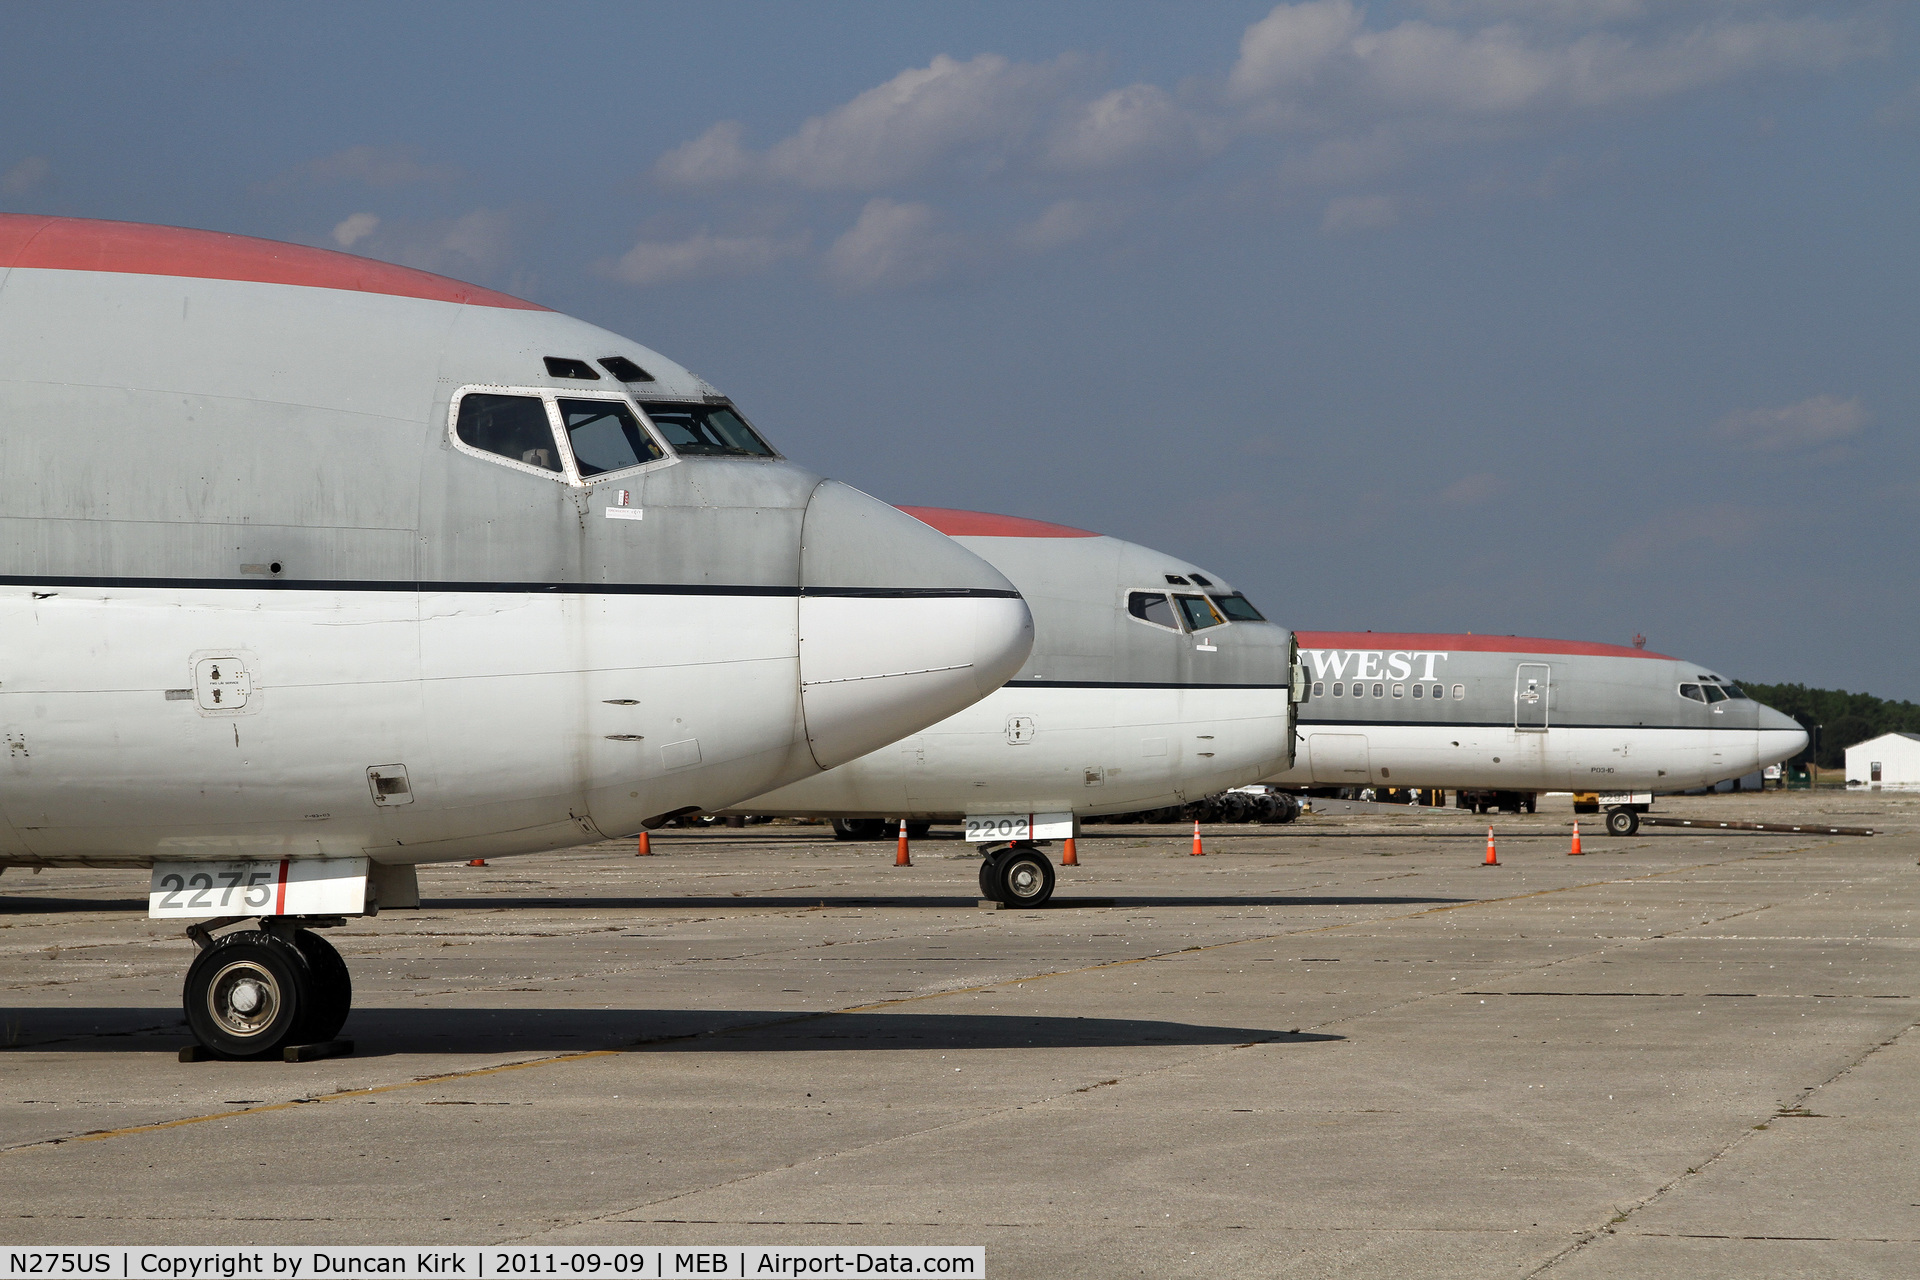 N275US, 1975 Boeing 727-251 C/N 21154, Noses of former Northwest chariots awaiting their fate